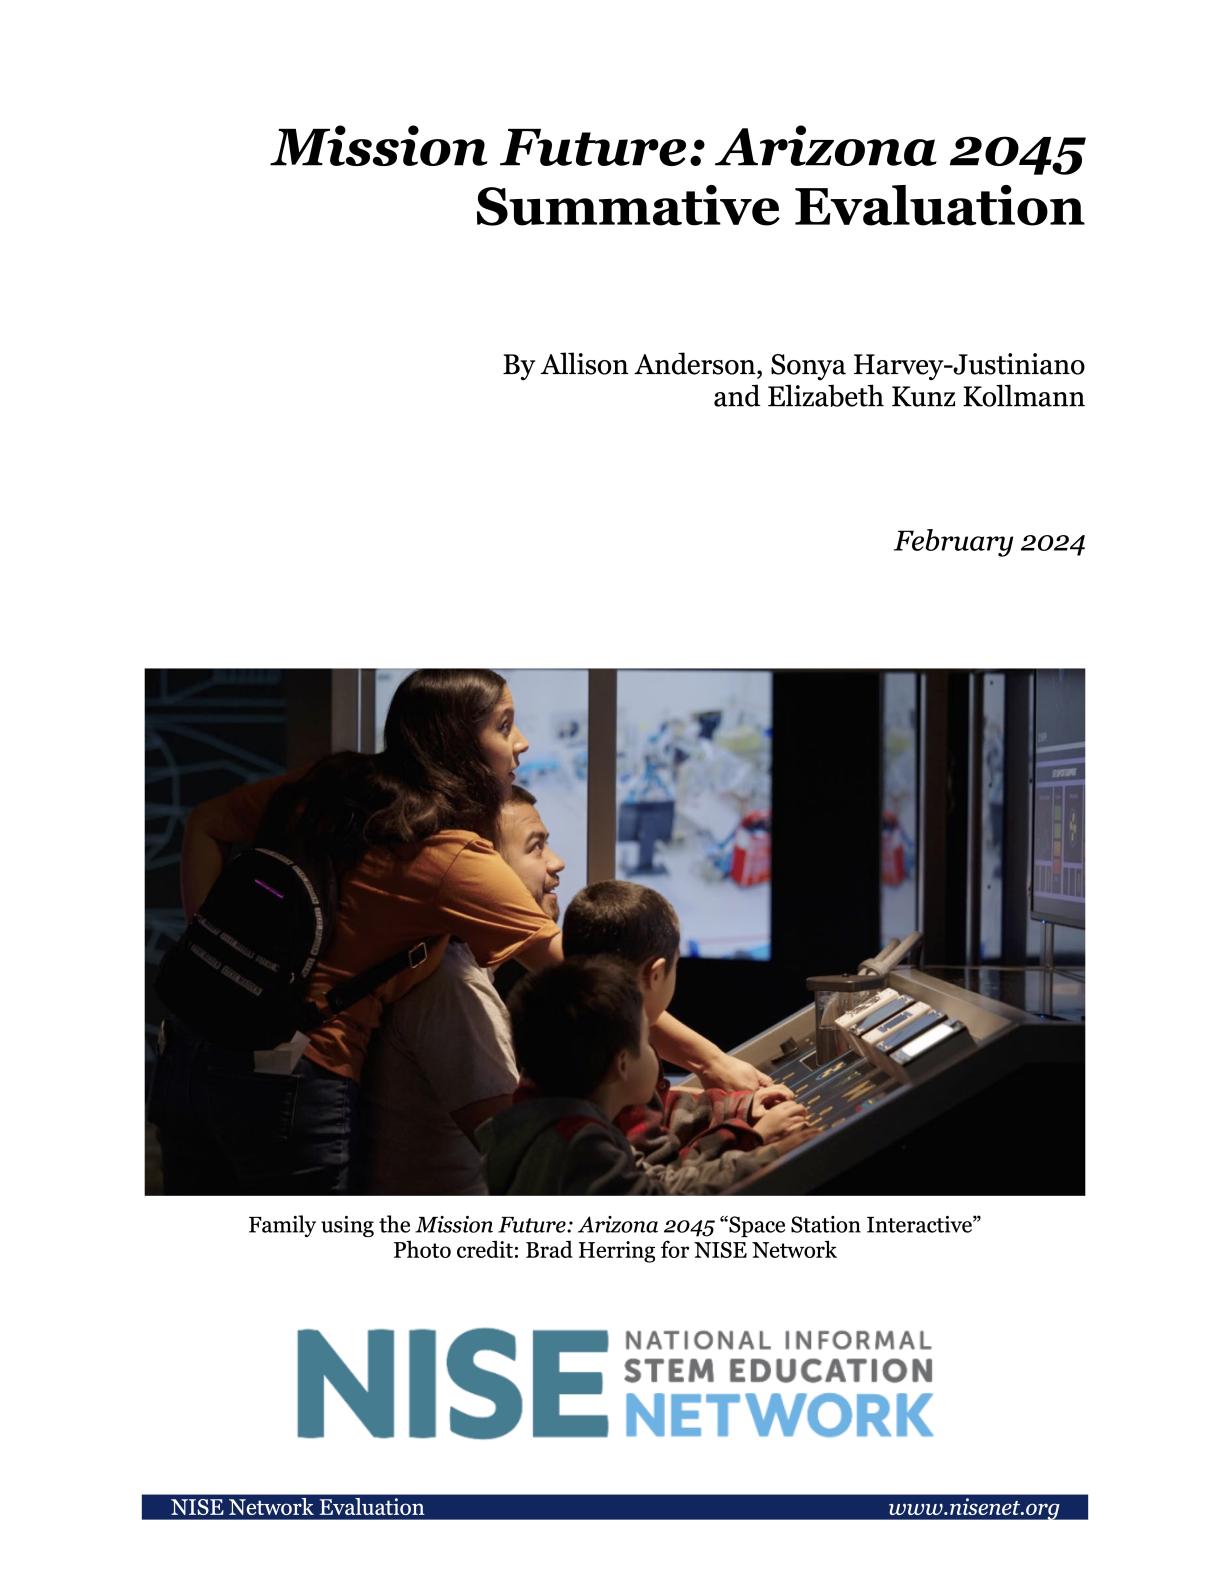 SEISE Project Mission Futures Exhibition Summative Evaluation Final Report revised February 2024 Report Cover Page with family using an exhibit